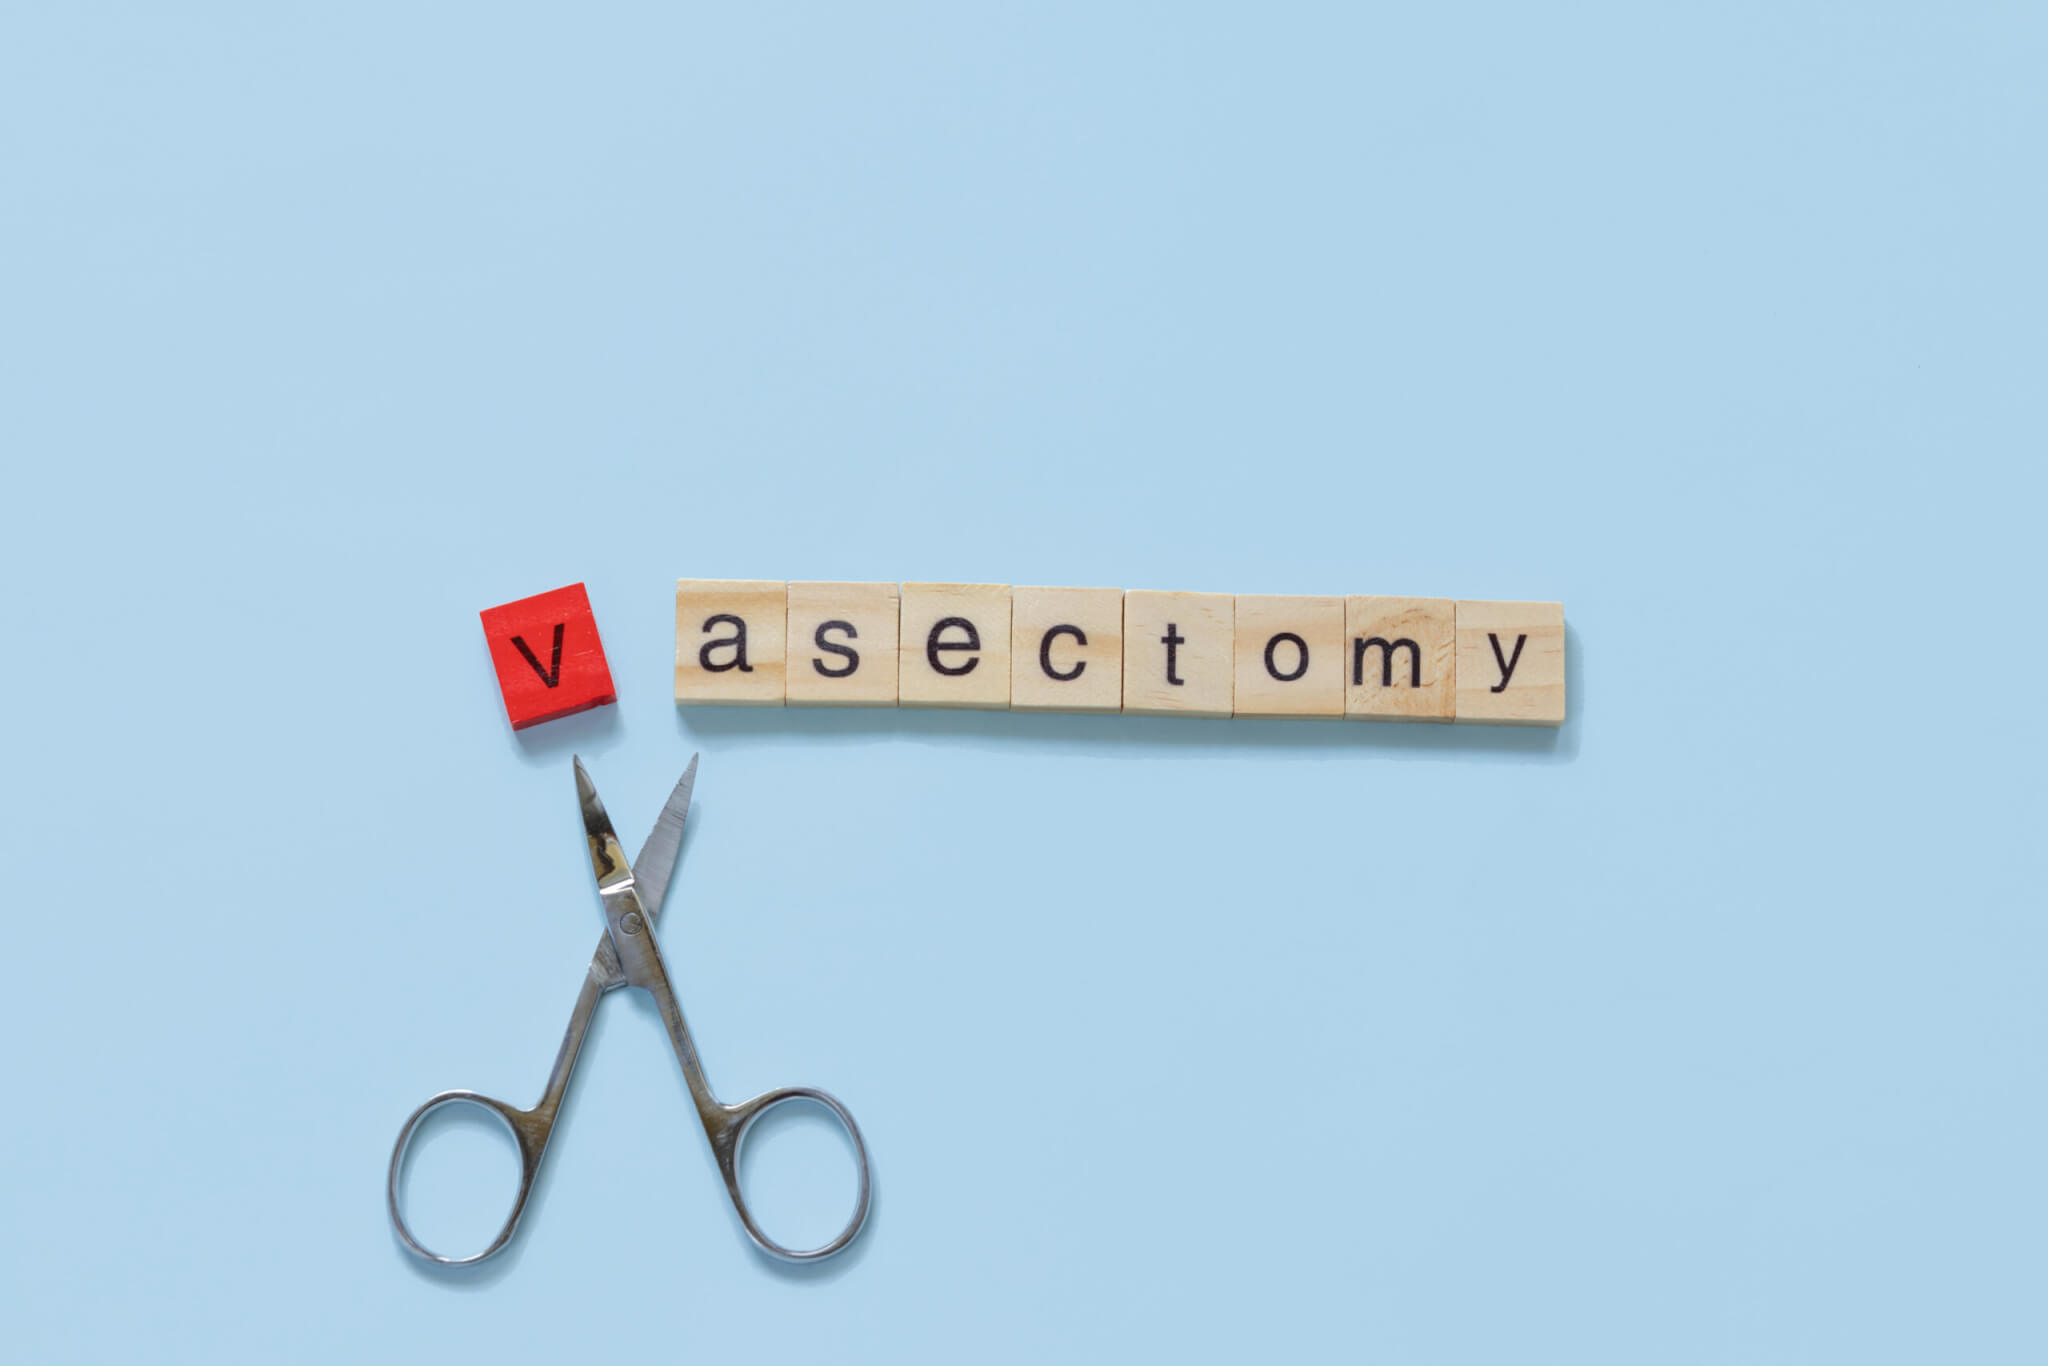 Vasectomy: The What, Why And Where - Ayu Health Blog